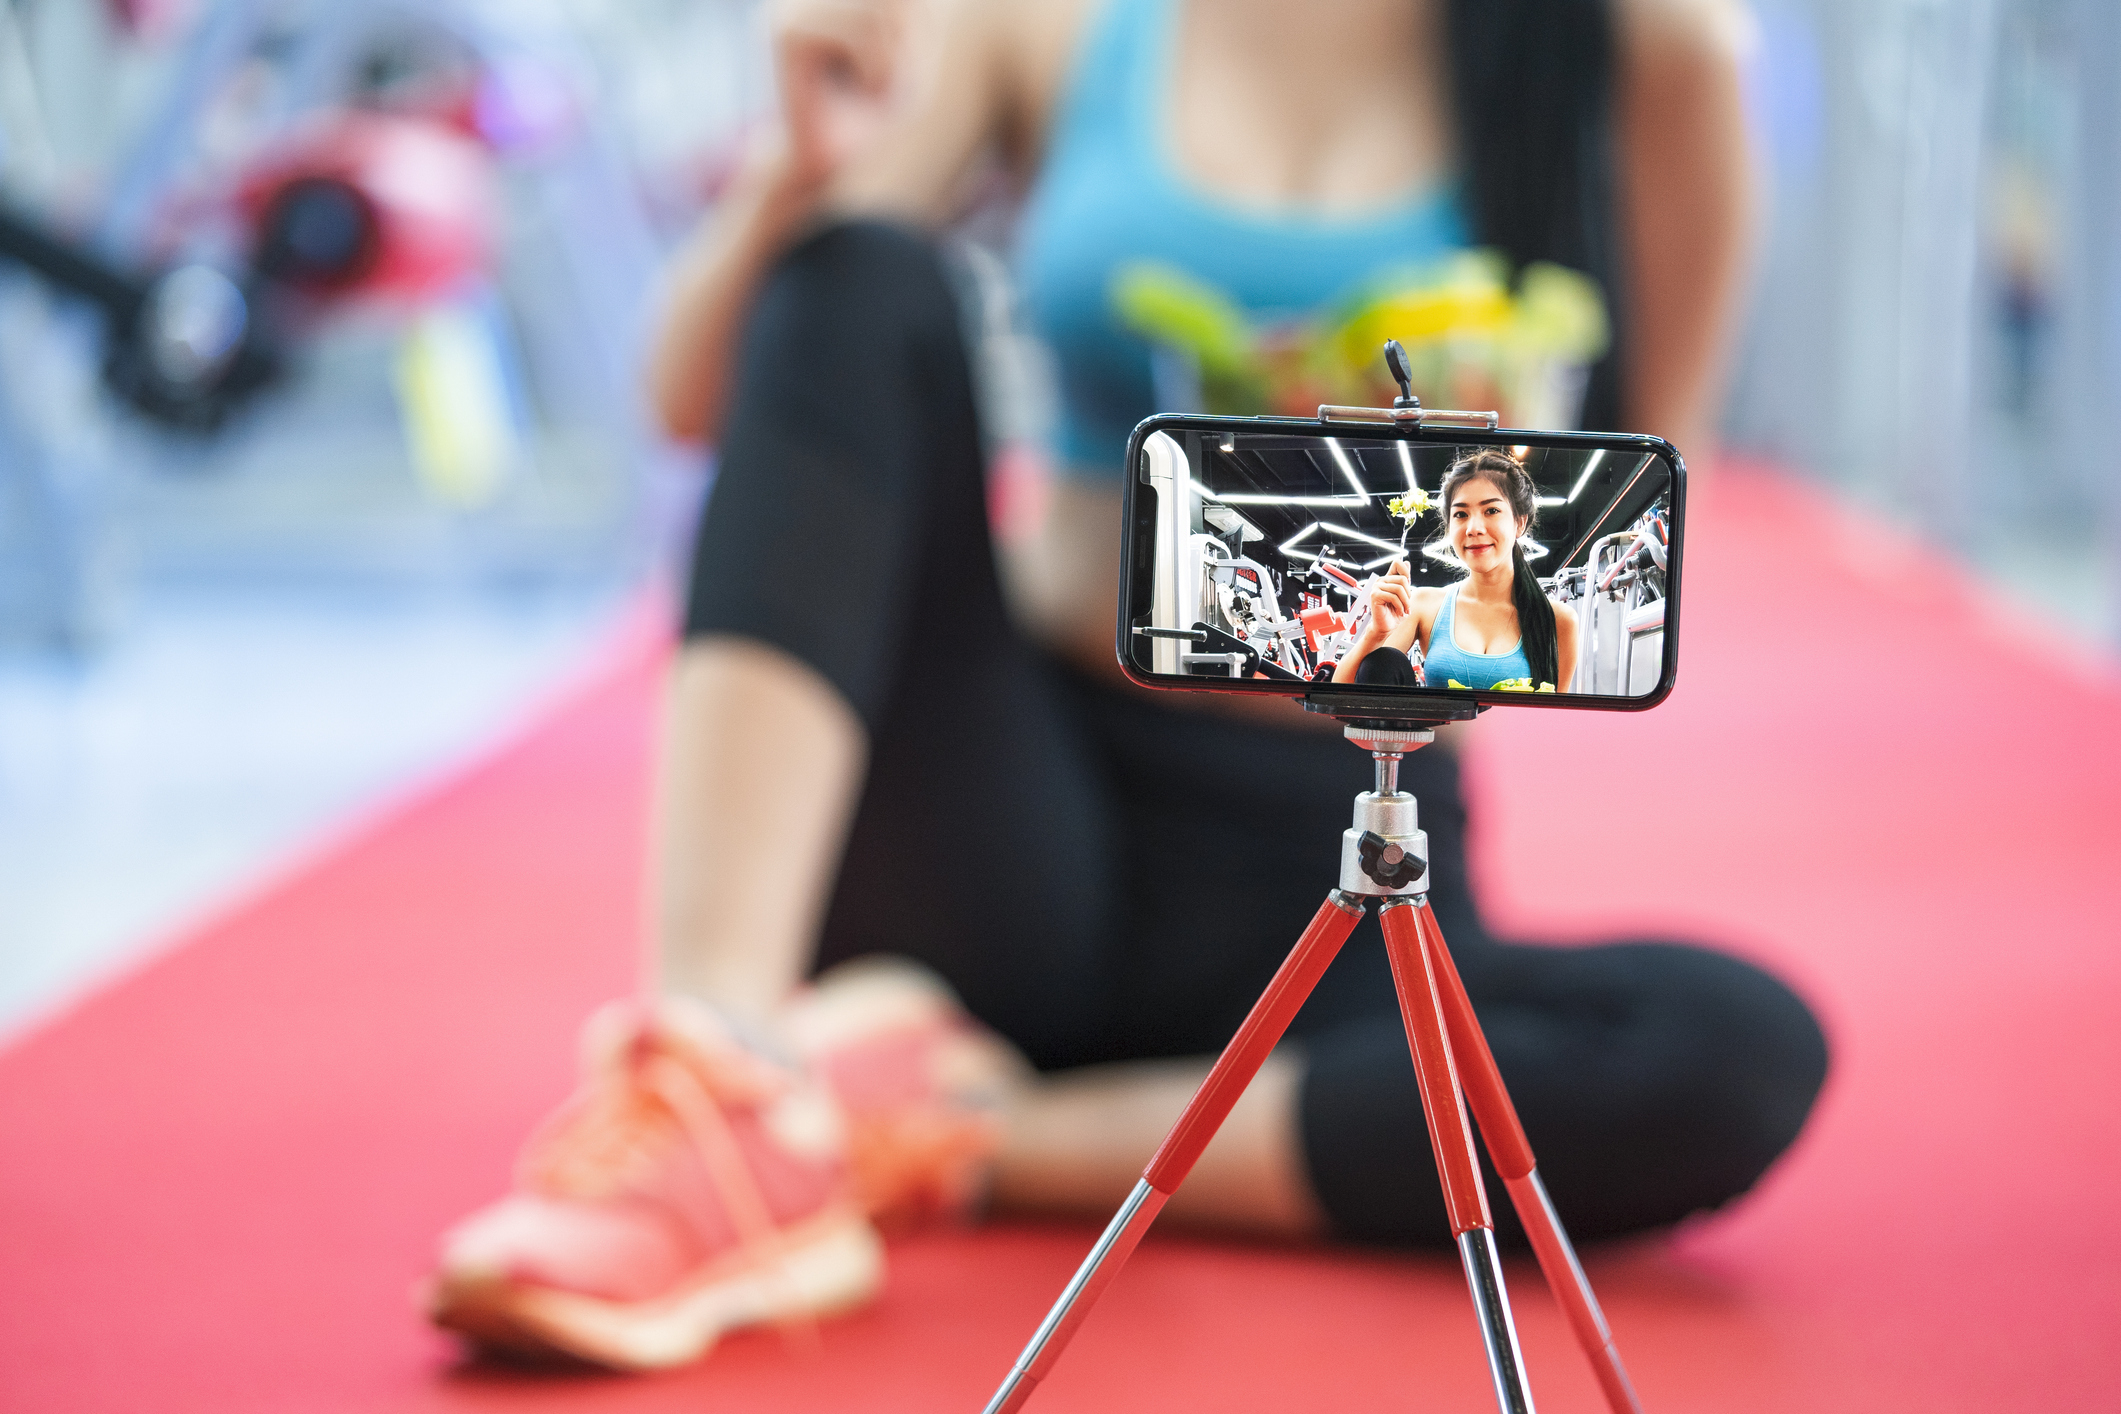 Woman records fitness vlog on smartphone with tripod, wearing workout attire, sitting on exercise mat